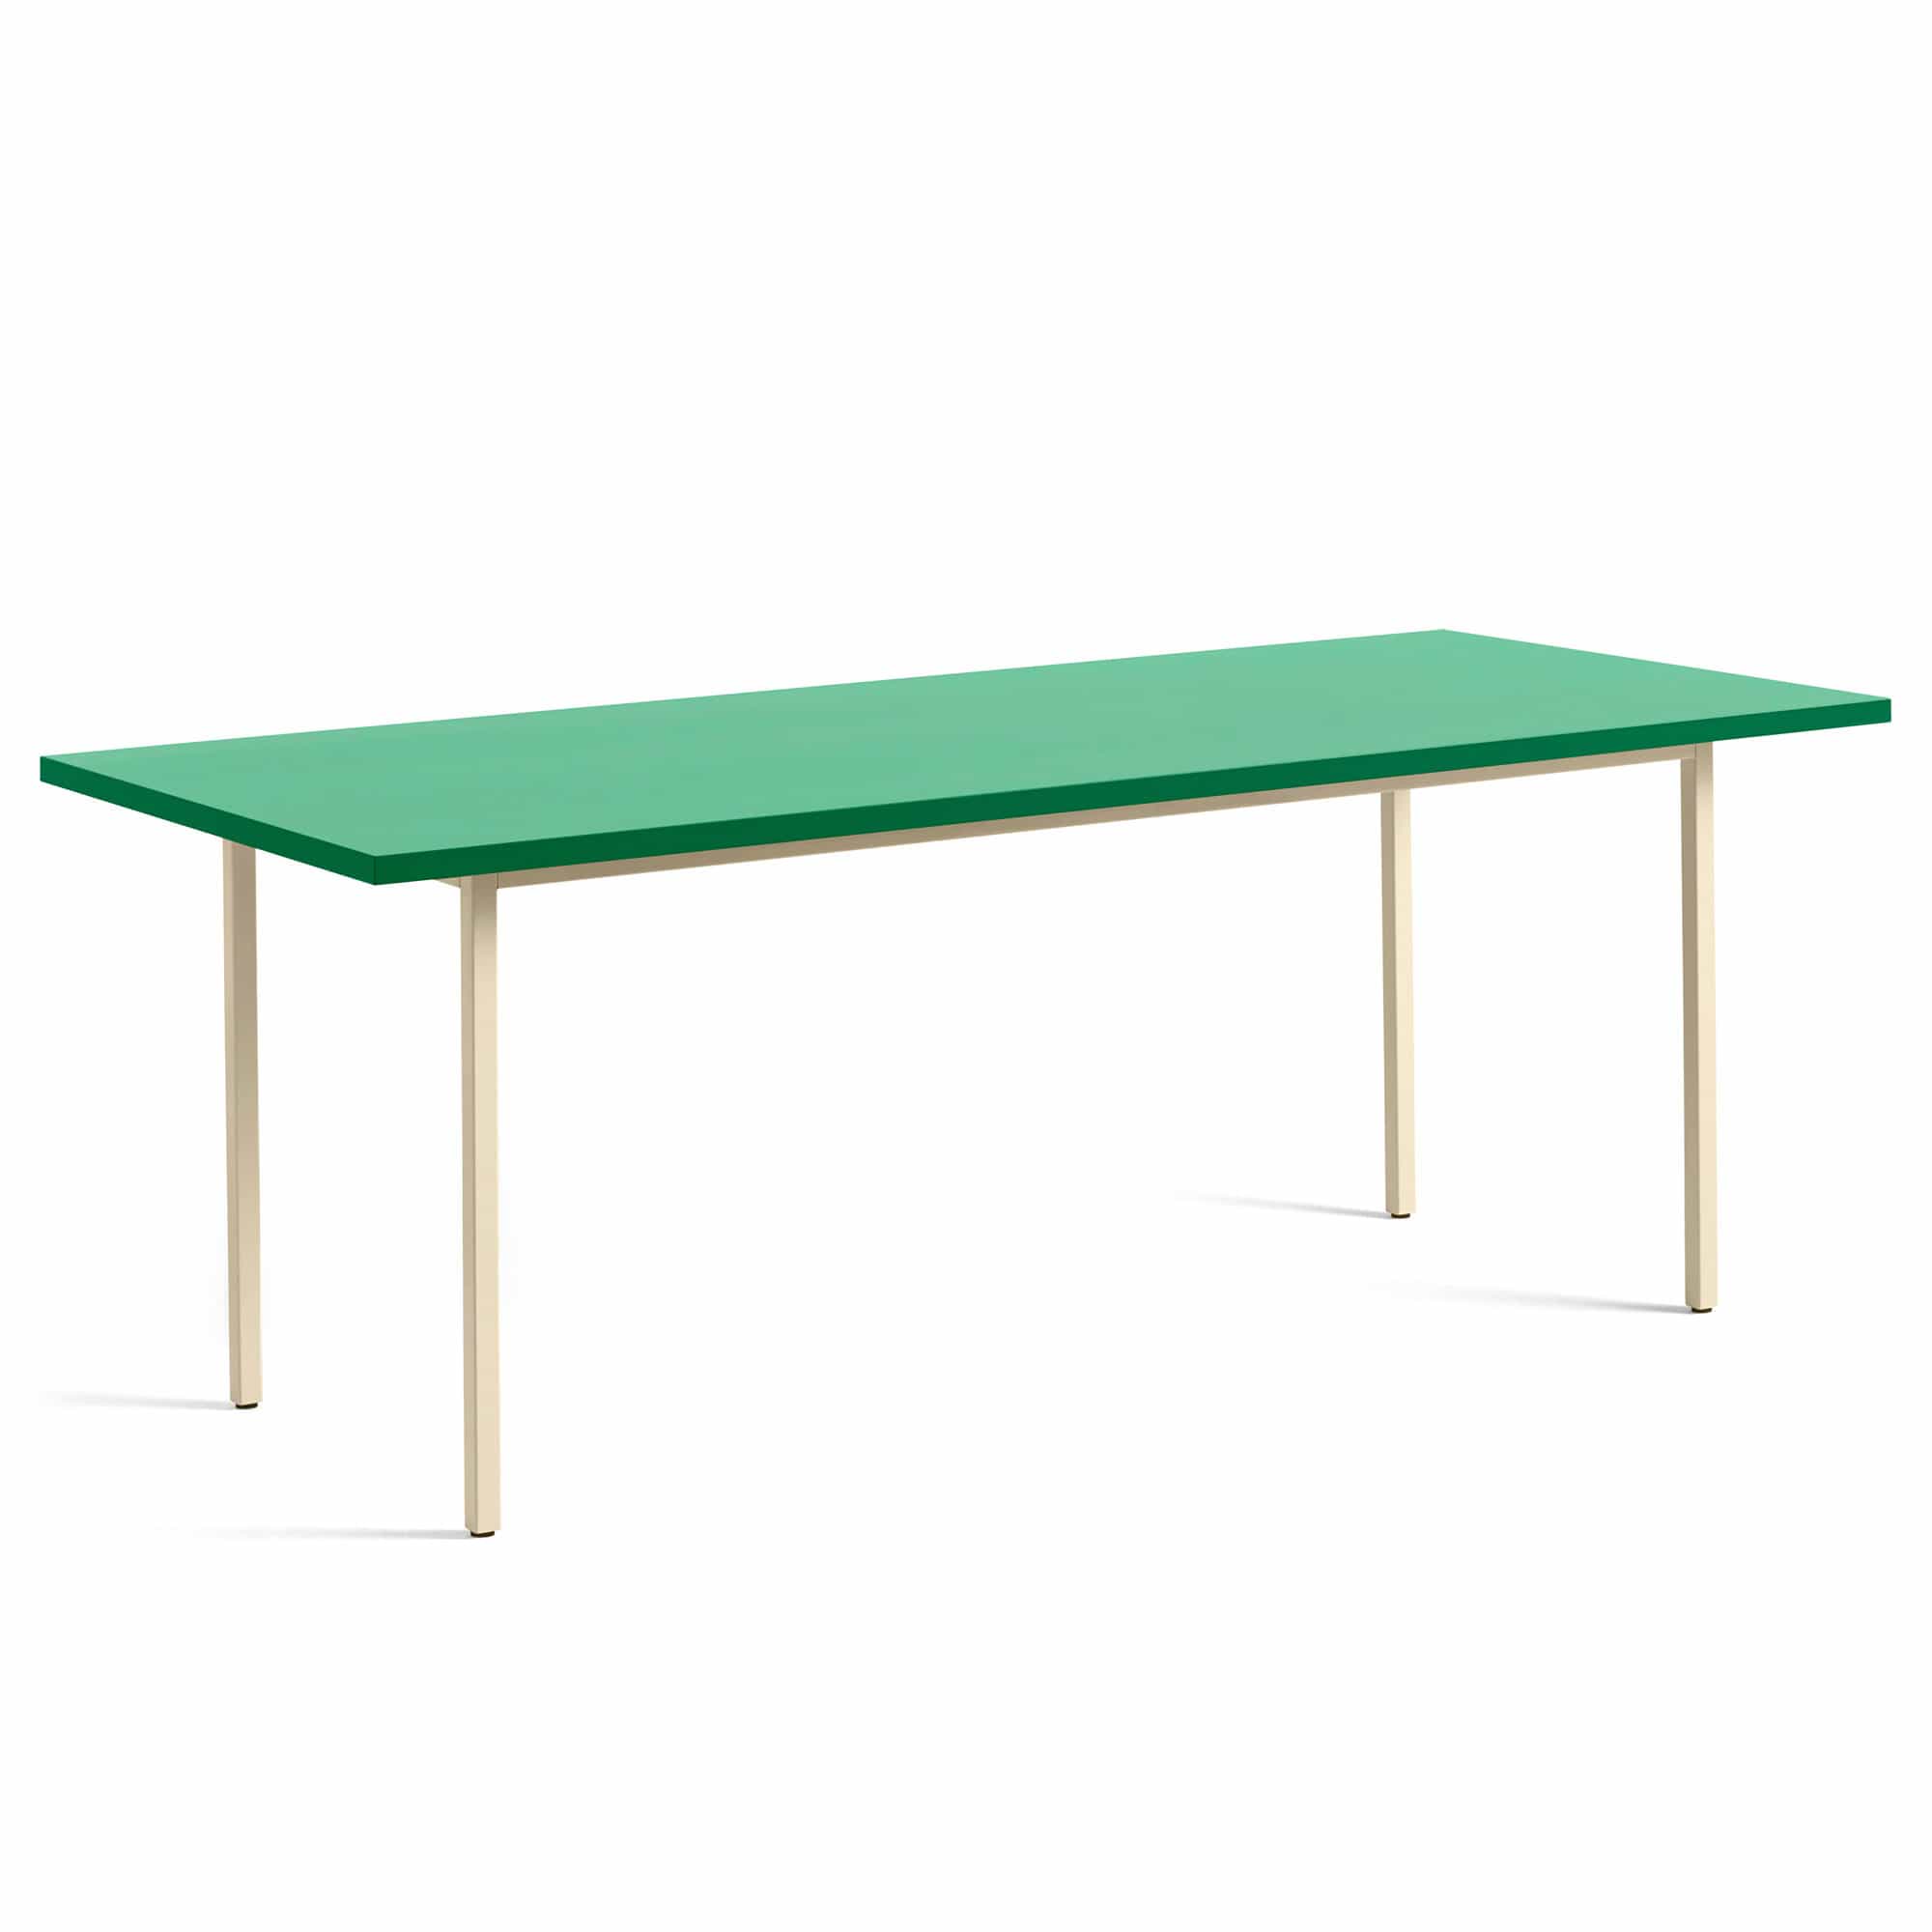 Two-Colour Table 200